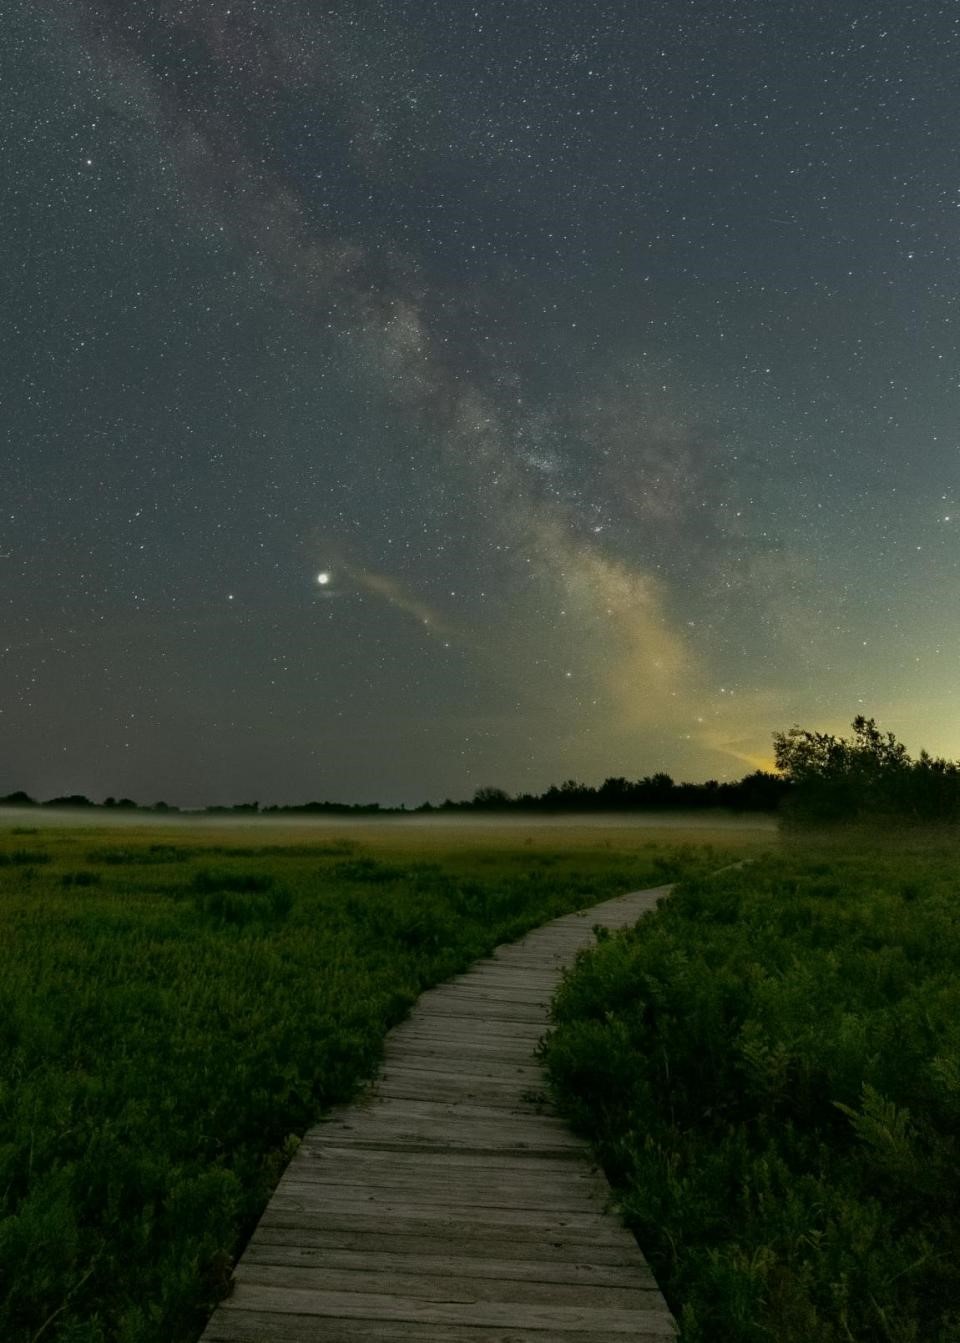 Image of a boardwalk under a starry night sky at Wells Reserve, Maine